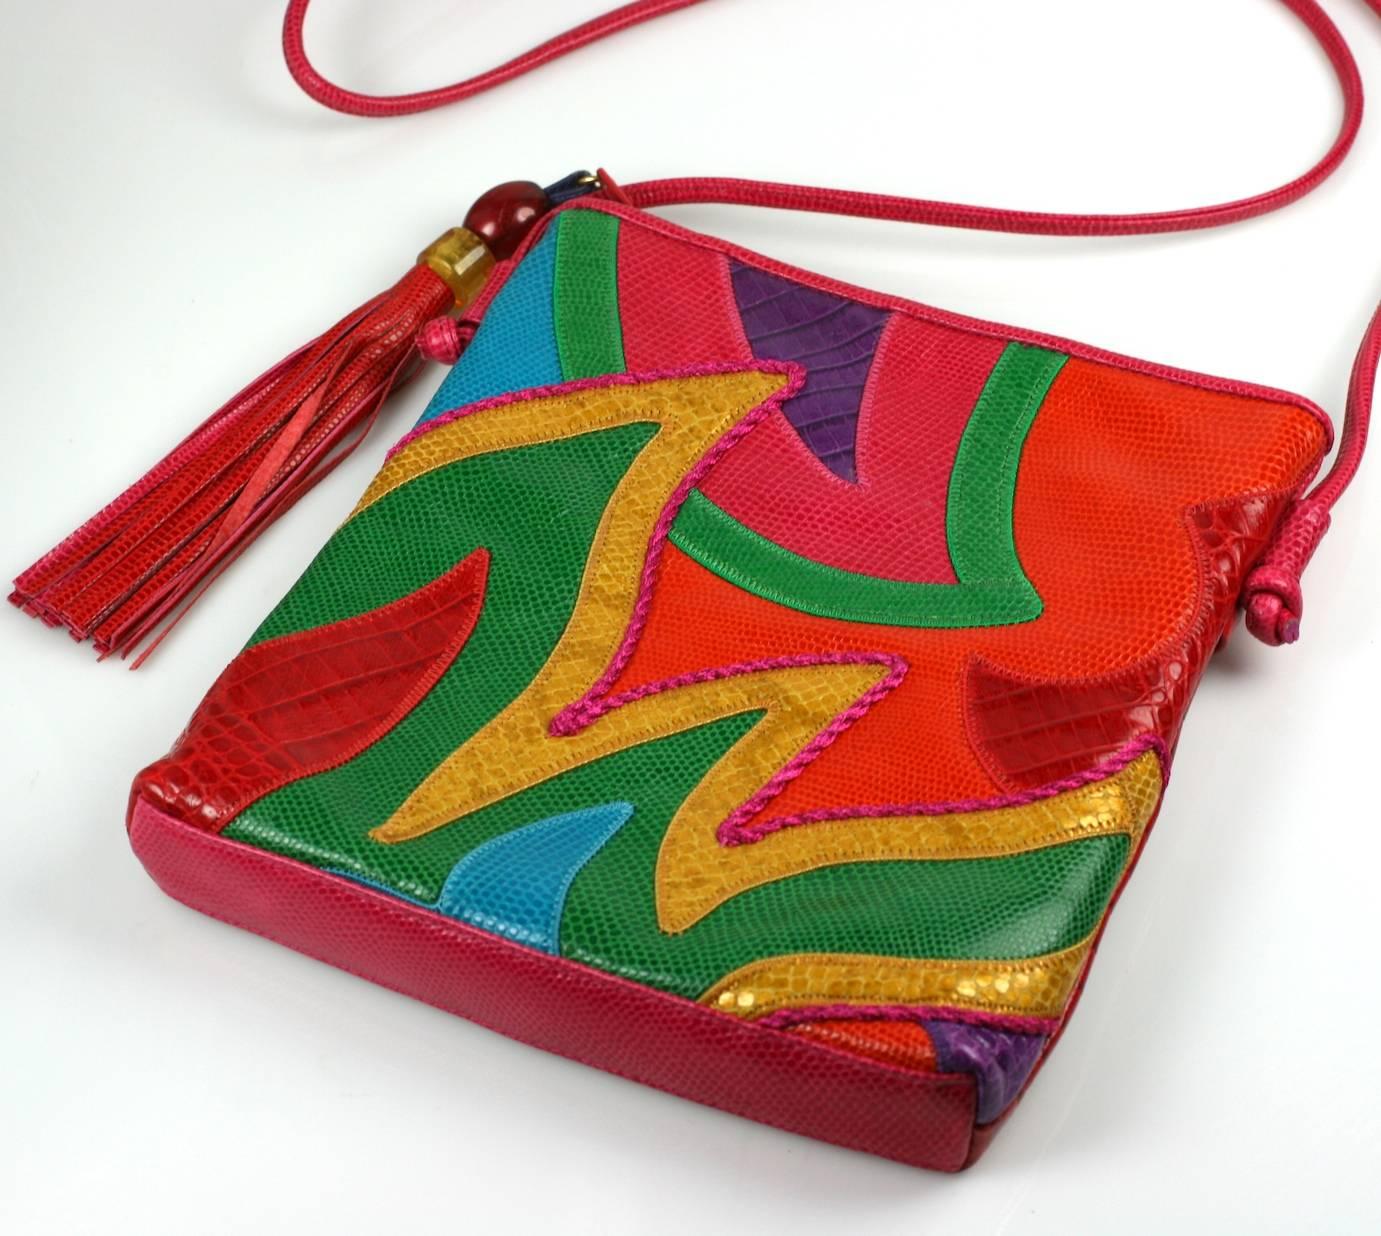 Sharif Pieced Shoulder Bag in brilliant multicolored shades in snake and croc grained leathers with large tasseled zip charm. Hidden zip pocket on back. 1980's USA. Excellent condition.   8